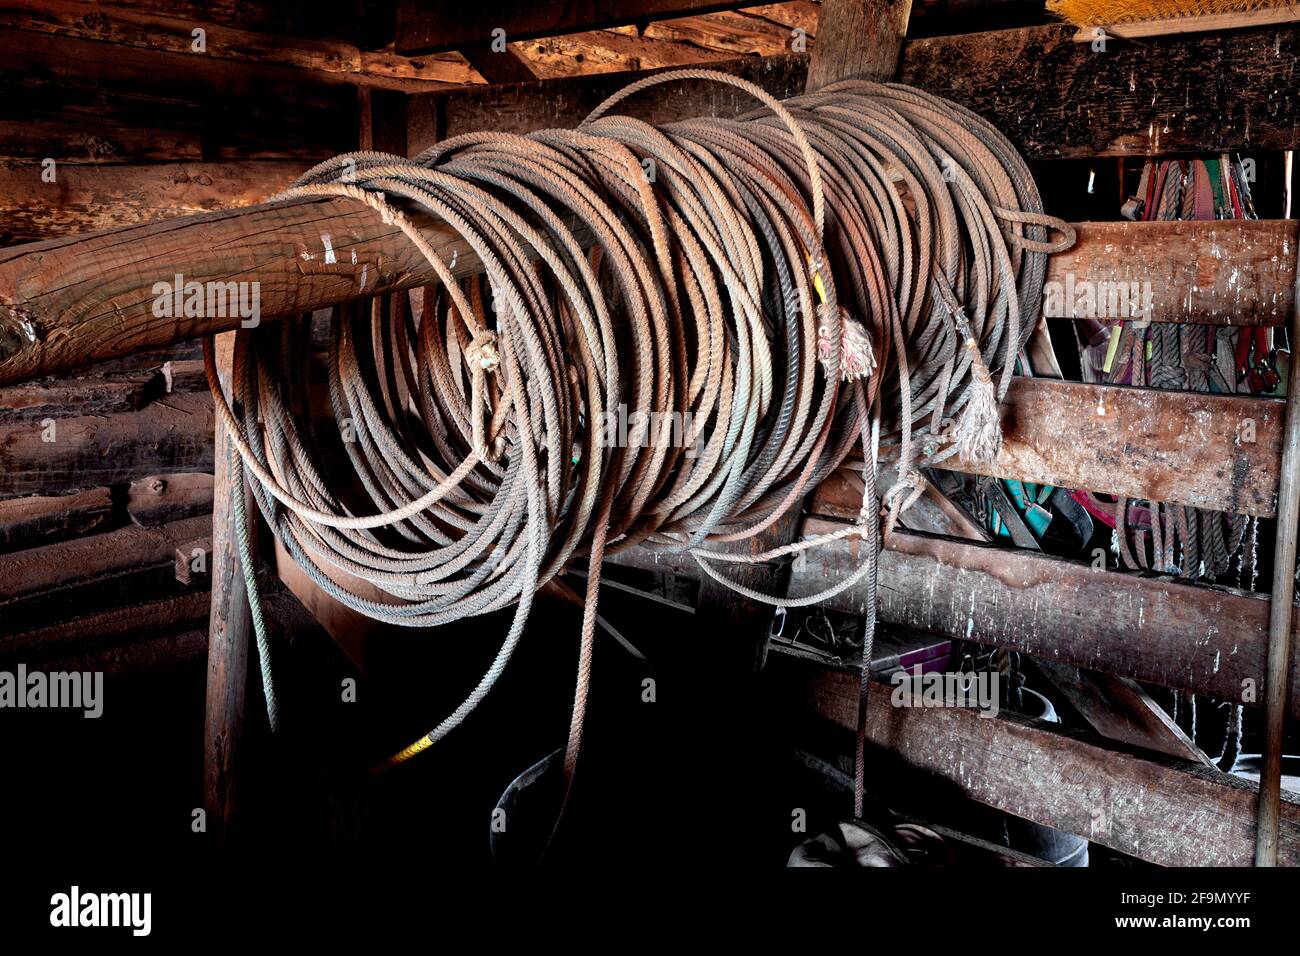 WY04126-00....WYOMING - Lariats stacked up in the barn at the Willow Creek Ranch. Stock Photo